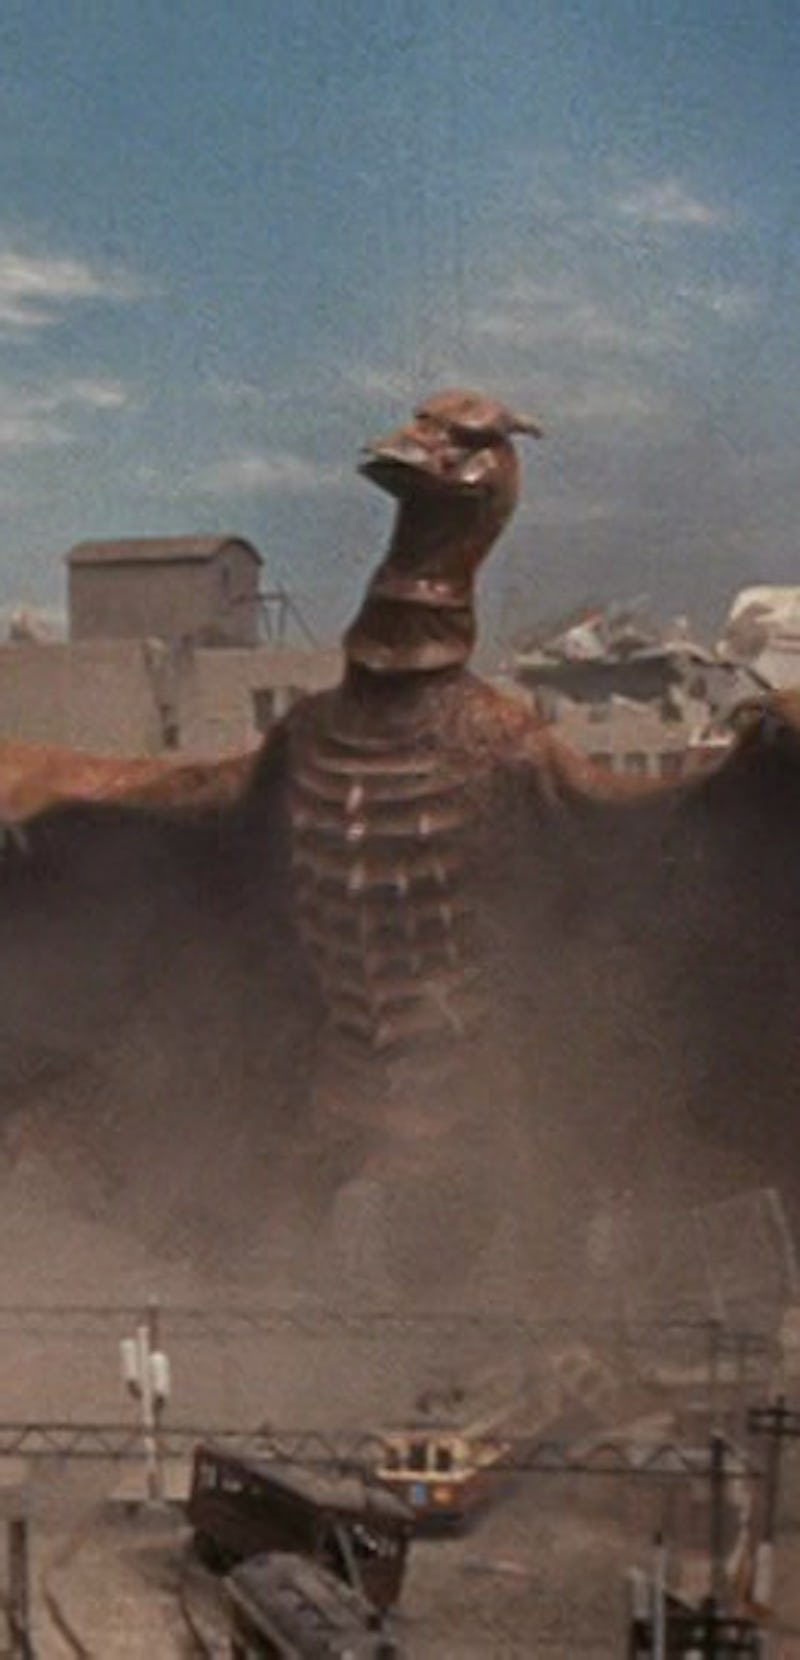 rodan monster destroying city with ruined building models in background